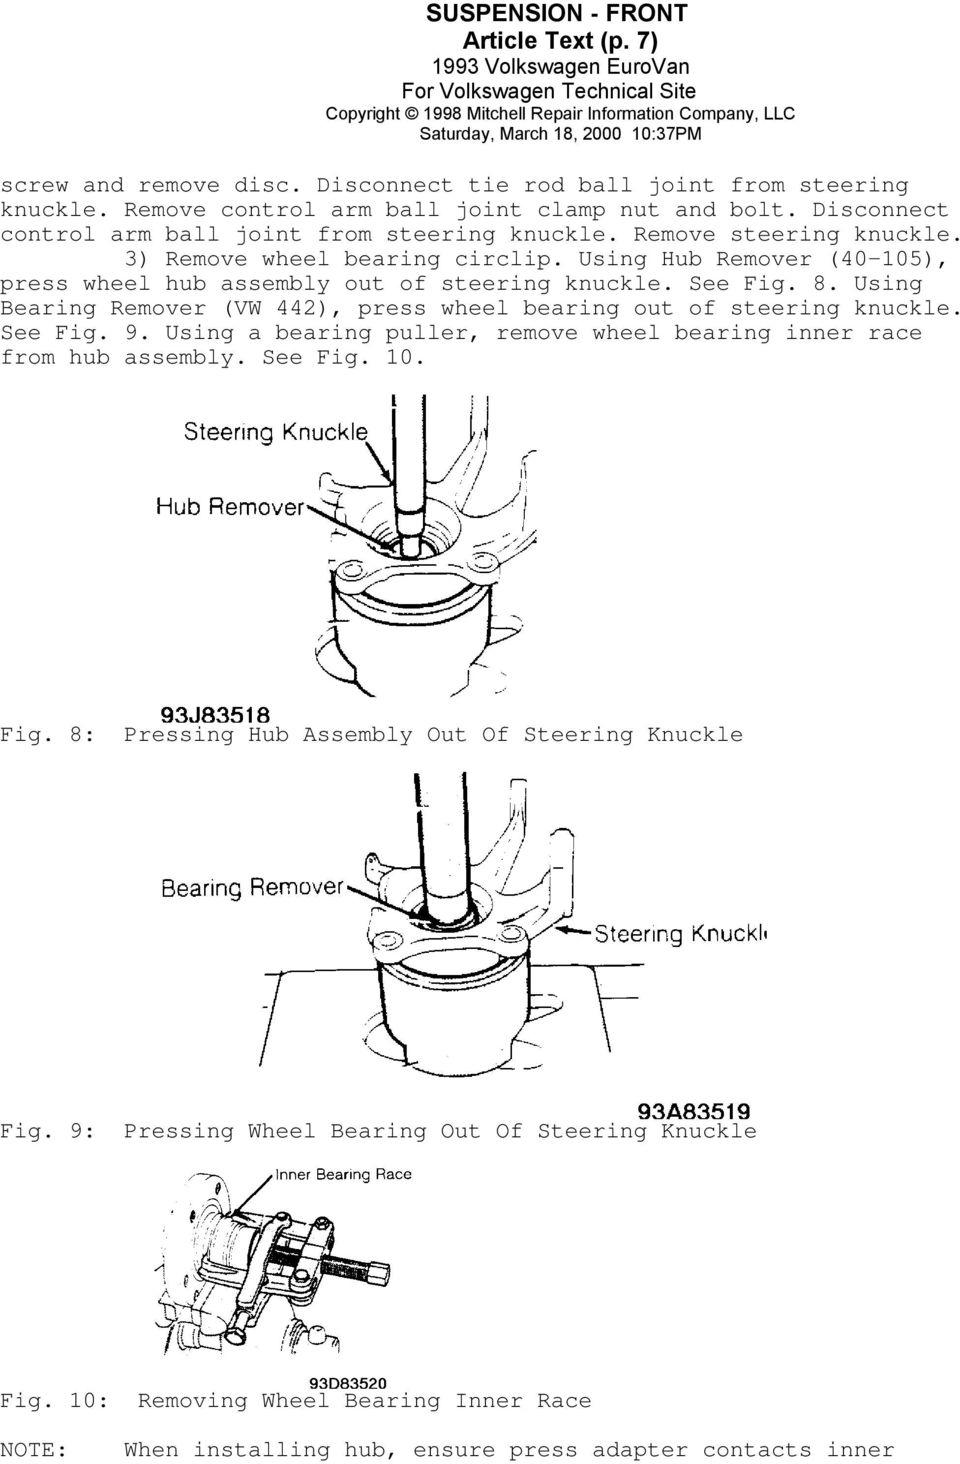 Using Hub Remover (40-105), press wheel hub assembly out of steering knuckle. See Fig. 8. Using Bearing Remover (VW 442), press wheel bearing out of steering knuckle. See Fig. 9.